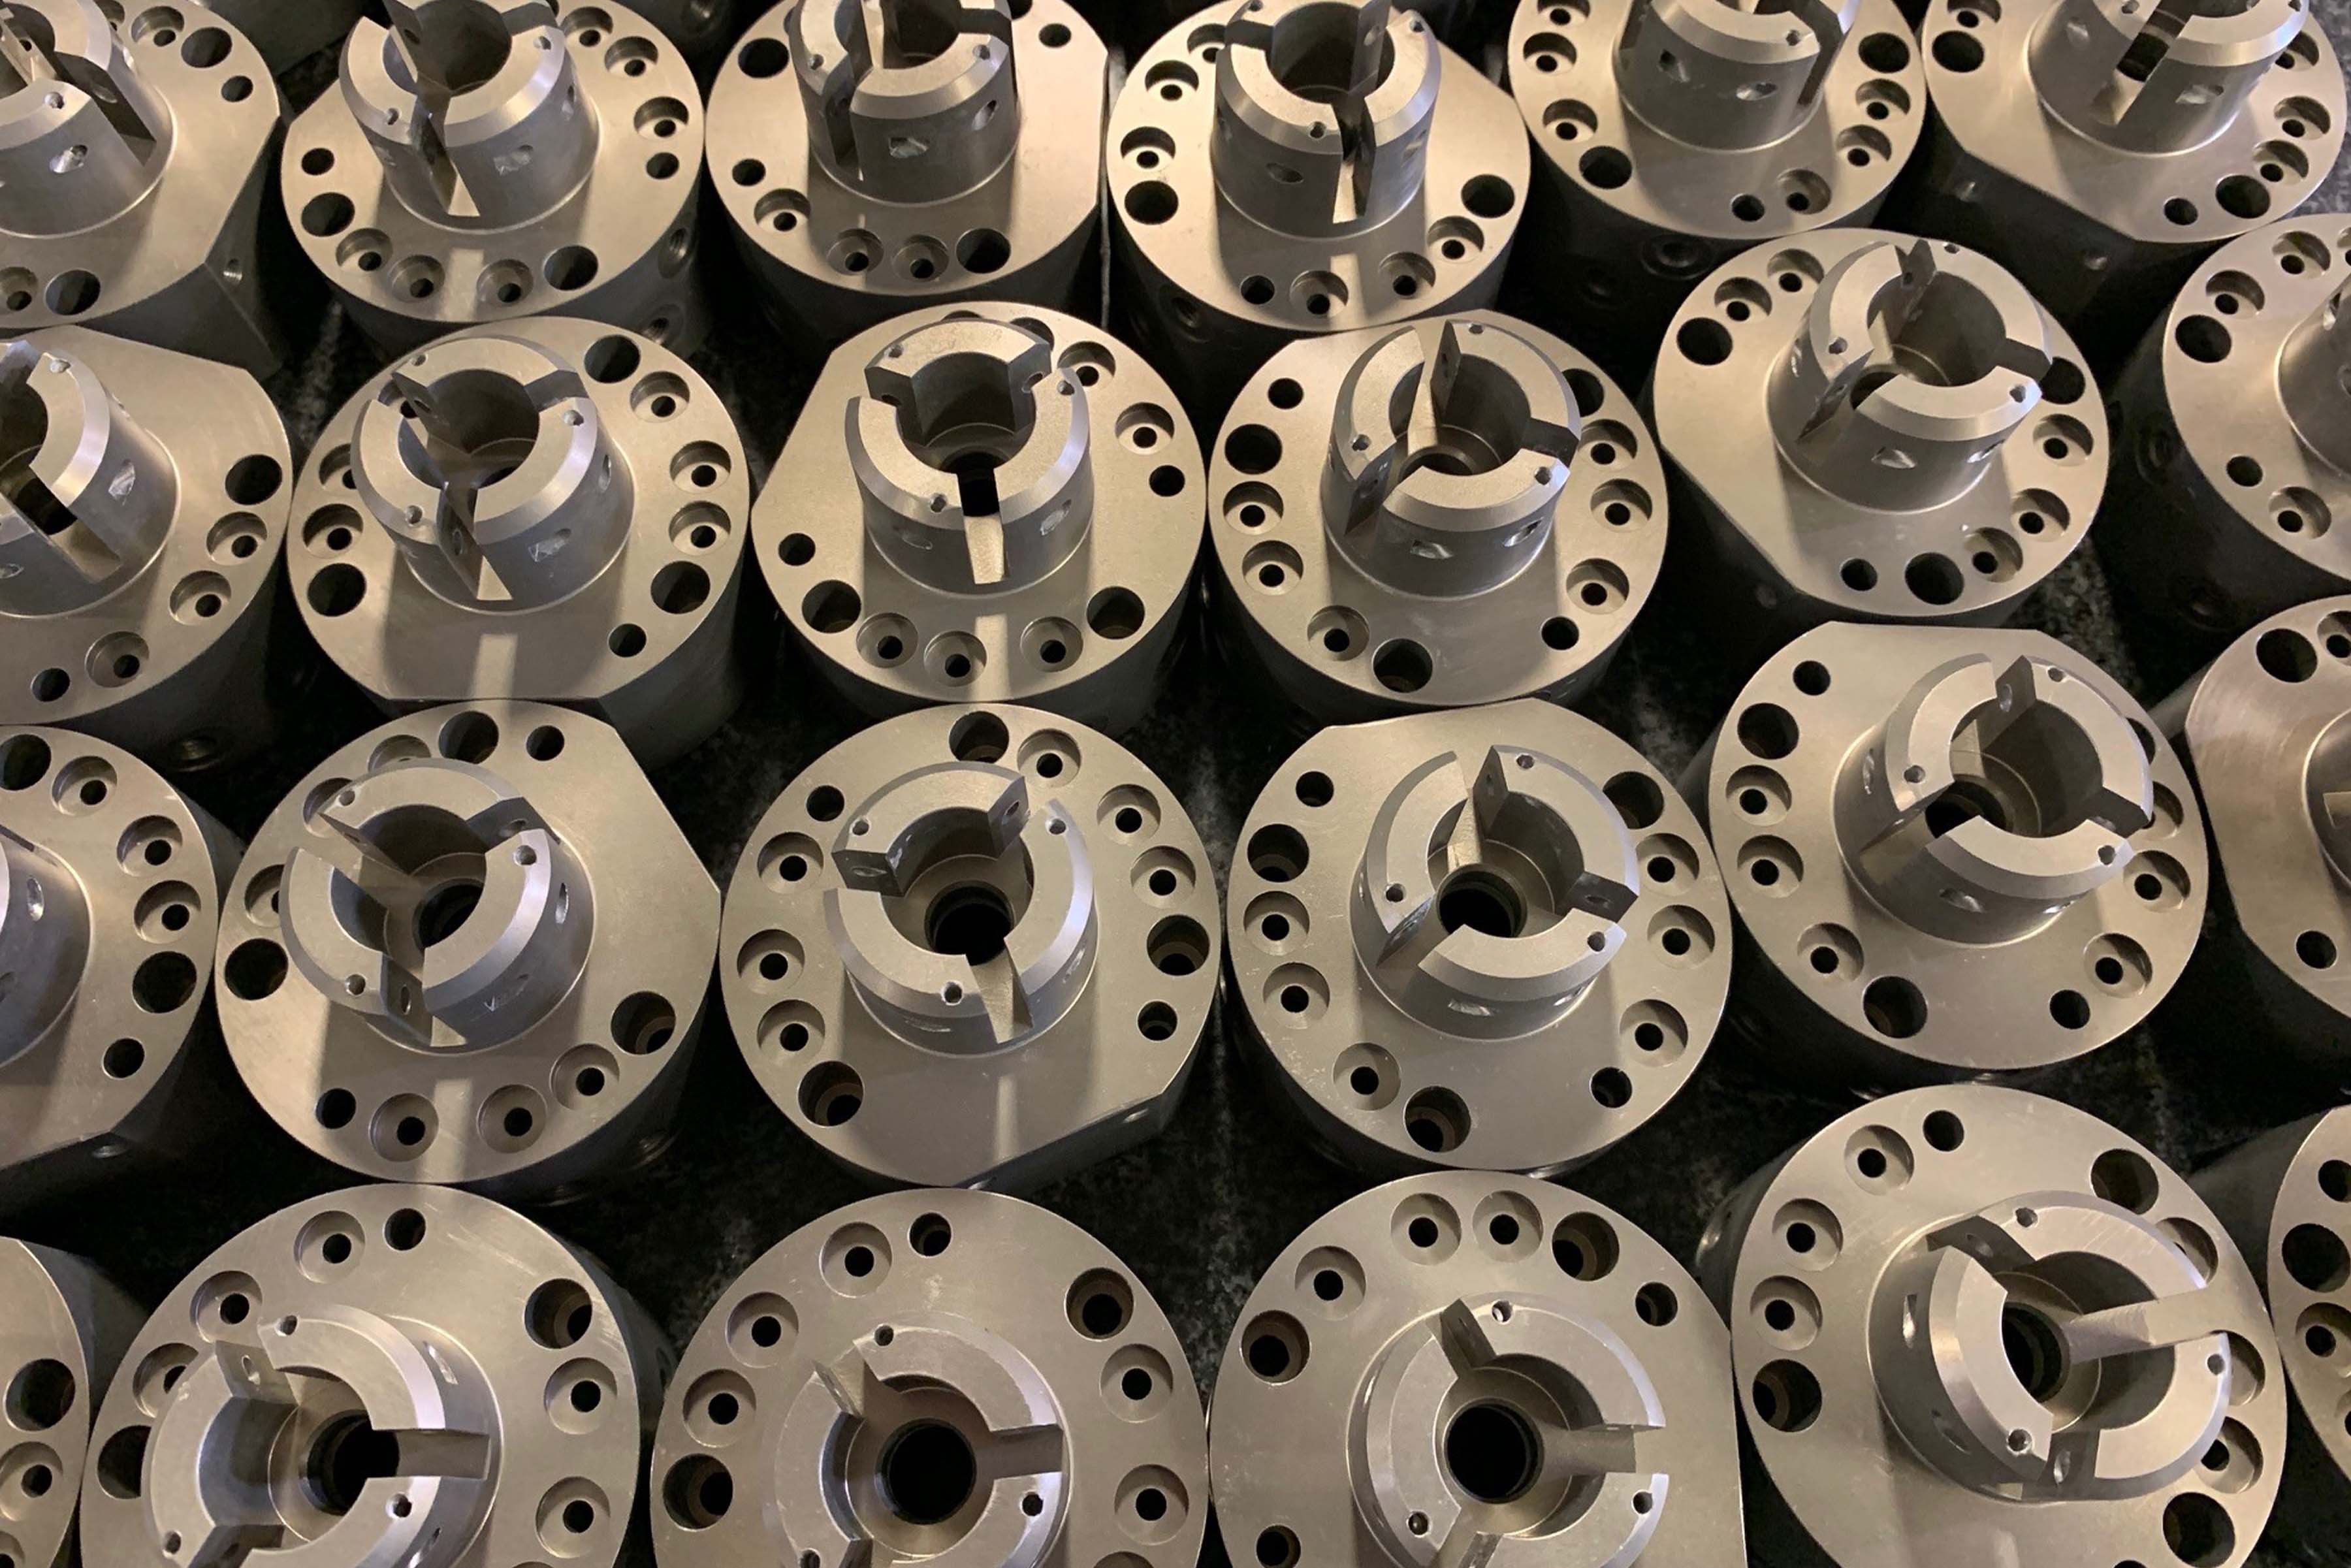 oem-automotive-Sioux Falls-SD | Sioux Falls-SD-cnc-machining-parts | Roberson Machine Company